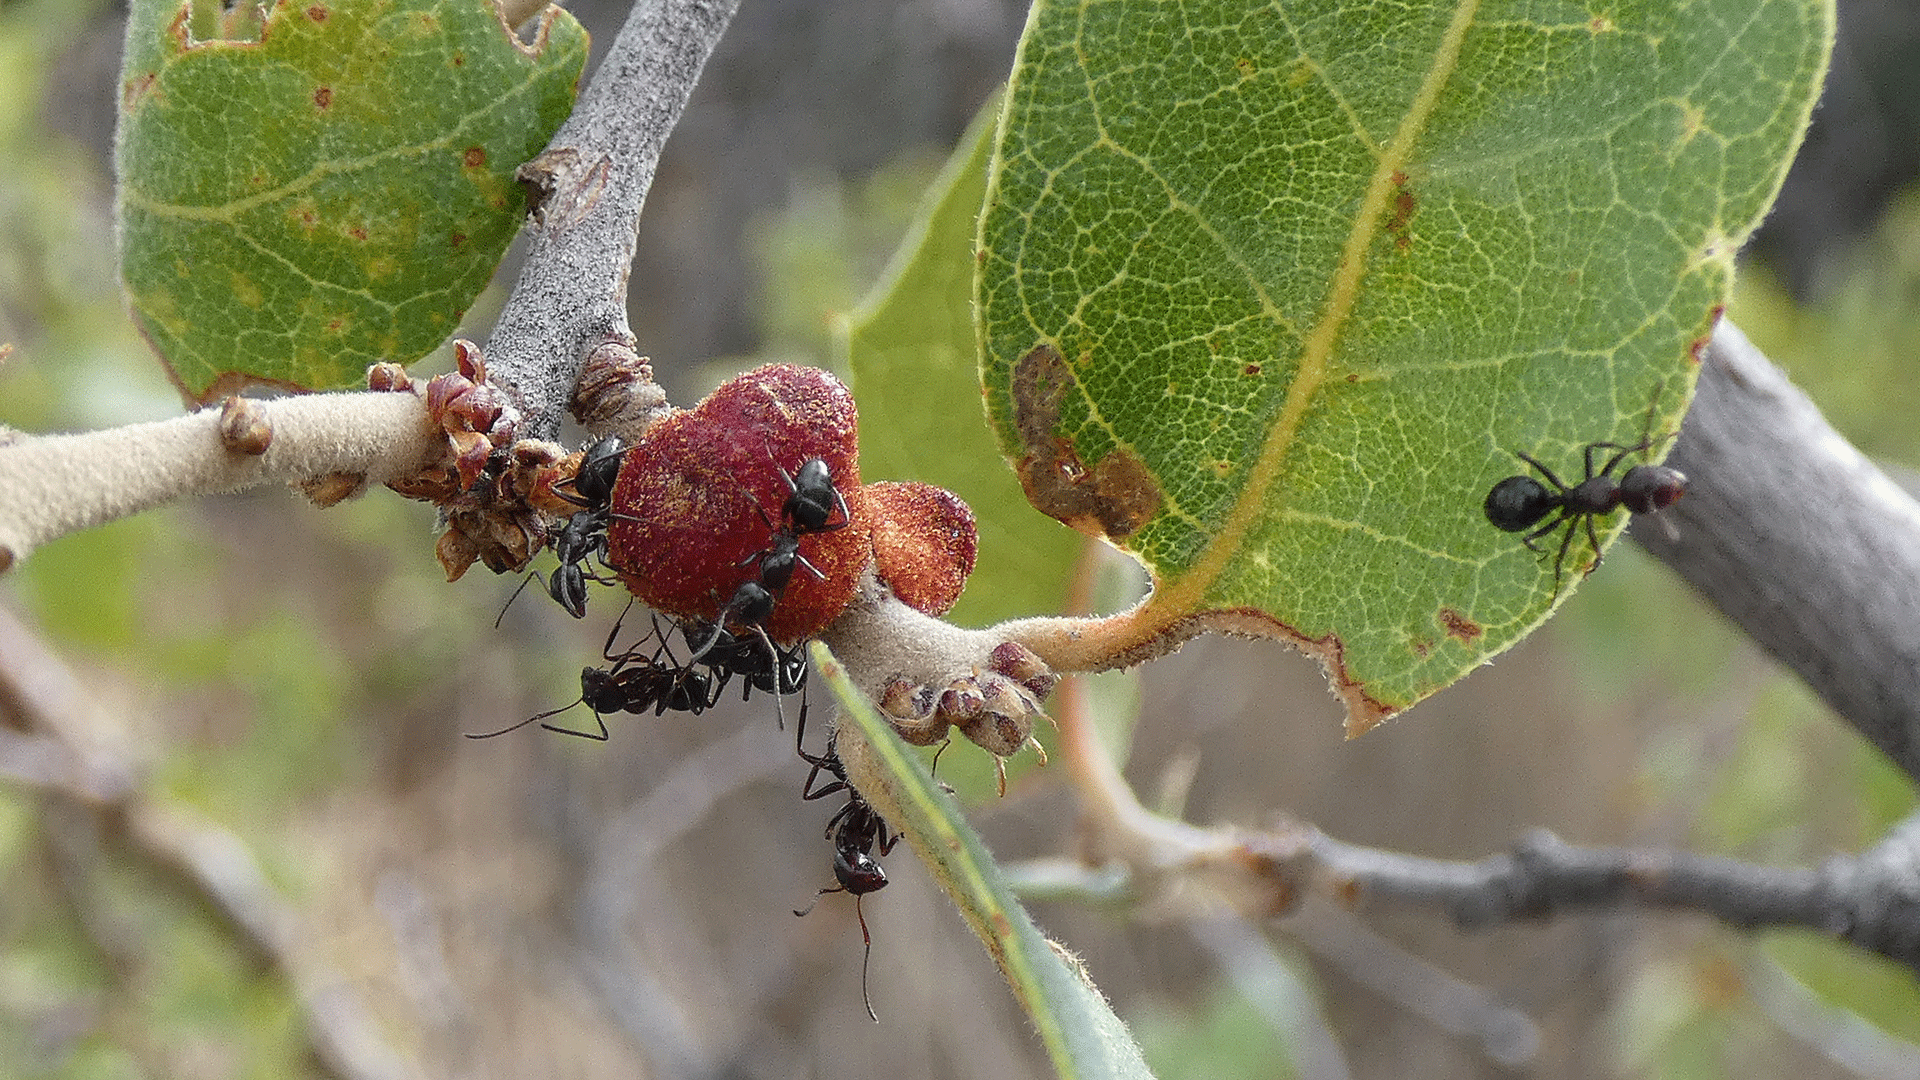 Galls on scrub oak, west foothills of the Sandia Mountains, August 2020